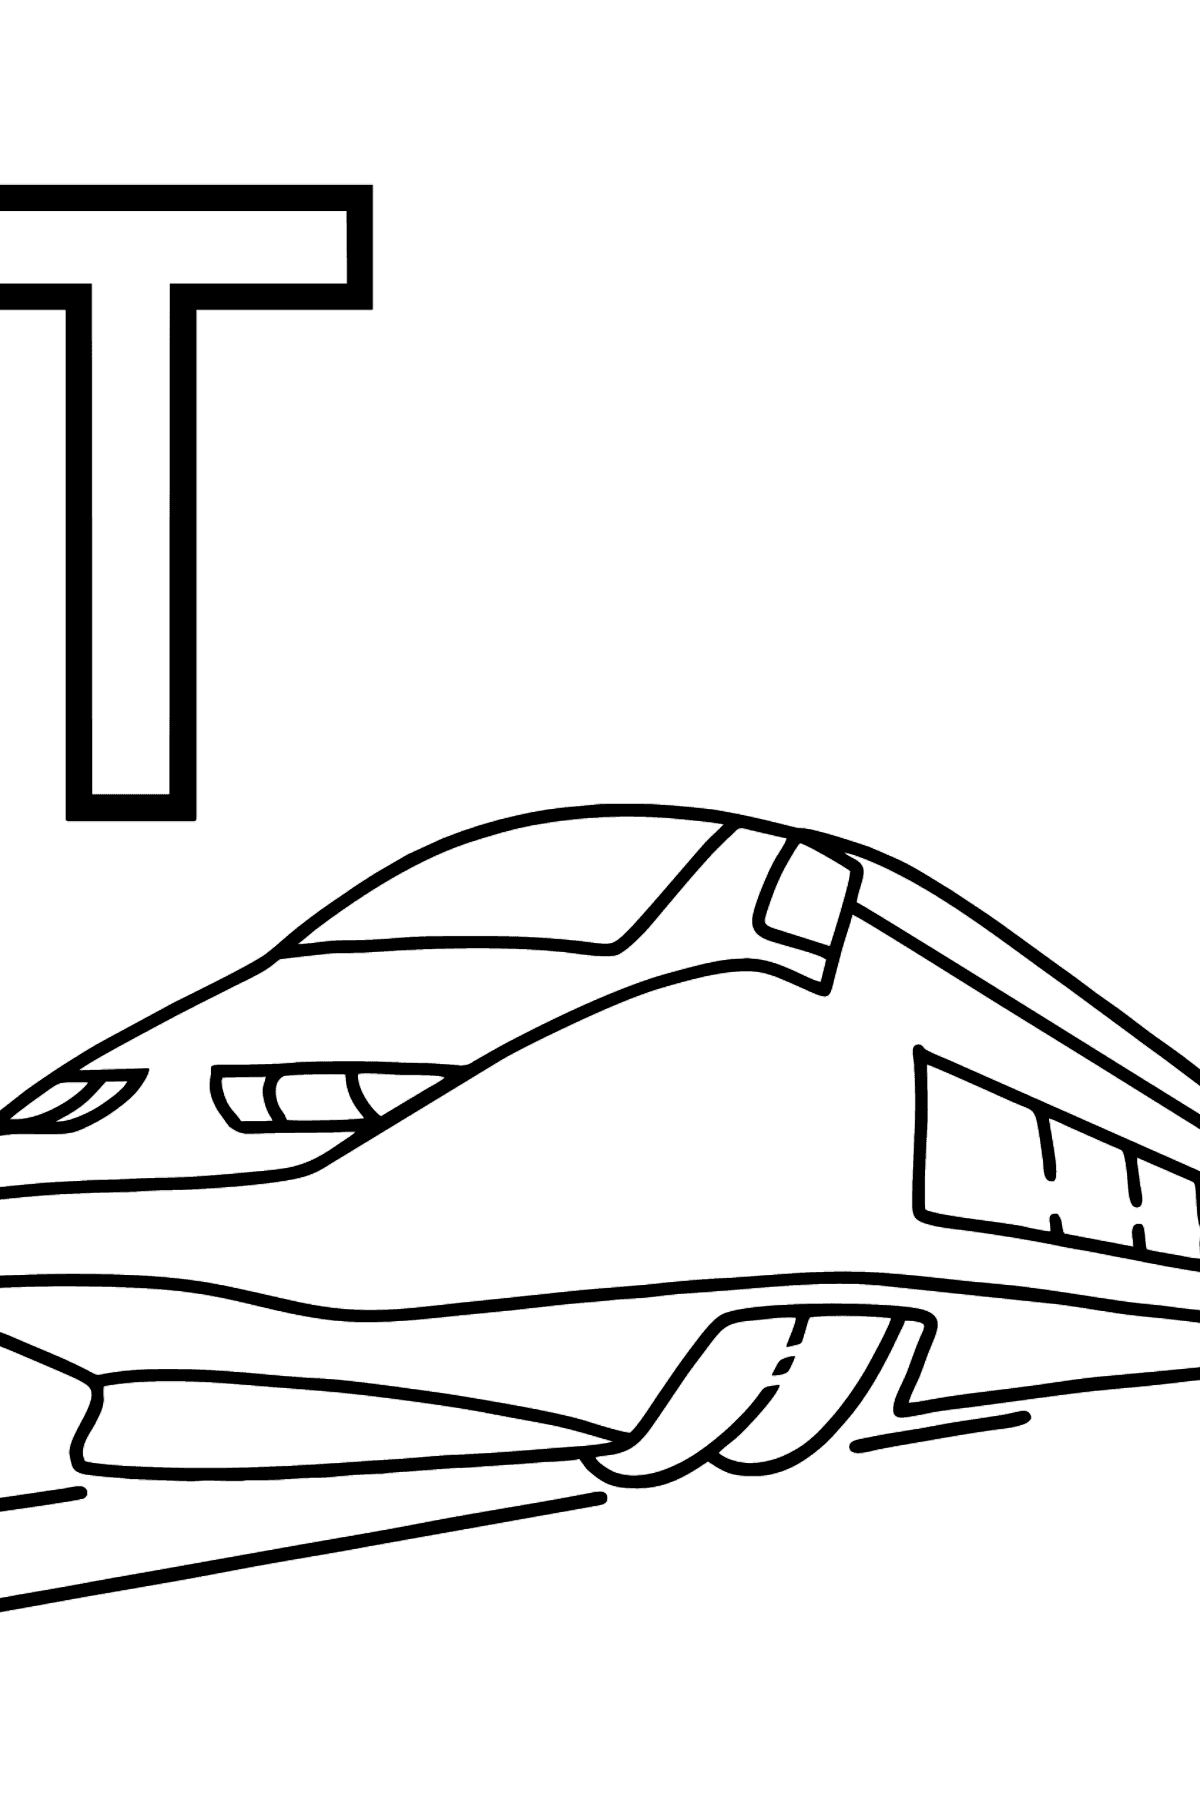 English Letter T coloring pages - TRAIN - Coloring Pages for Kids